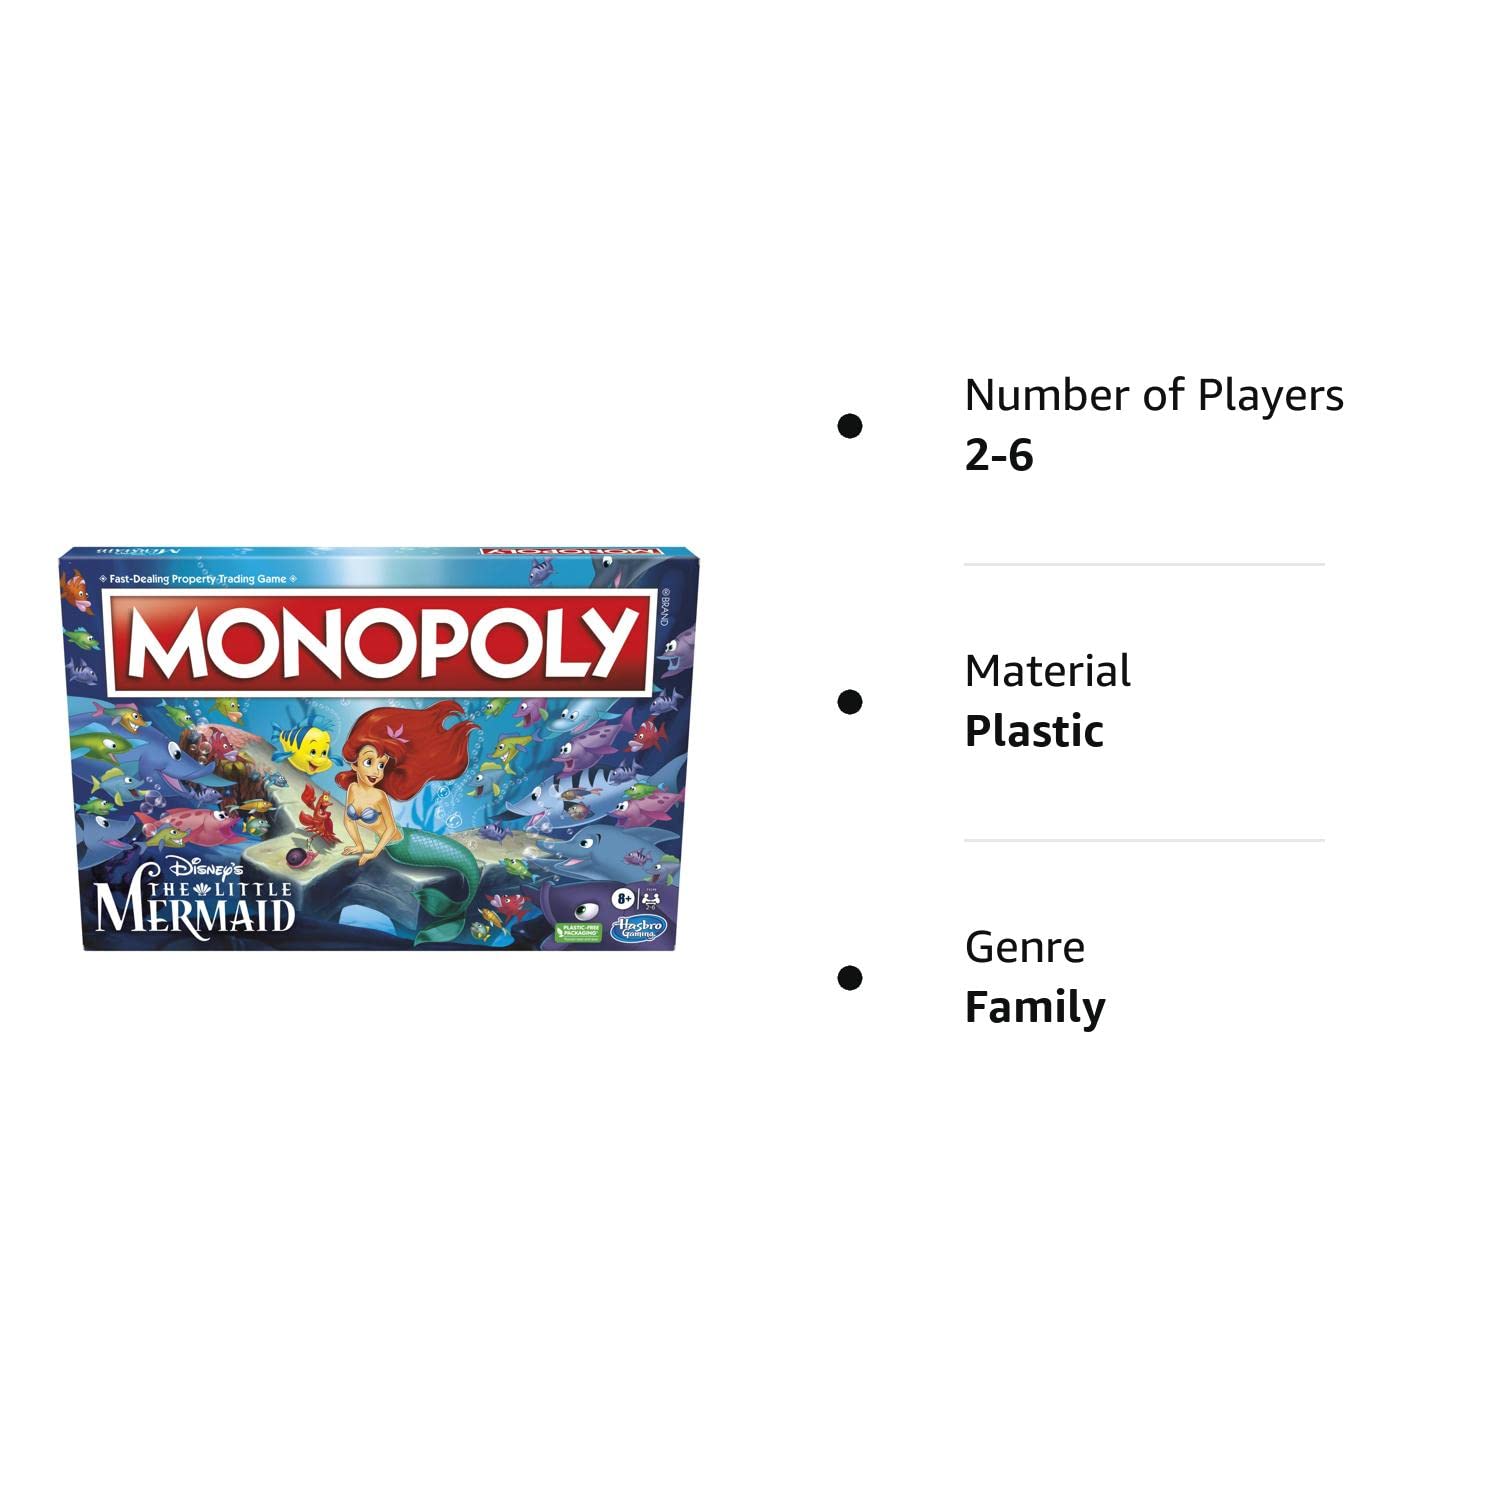 Monopoly: Disney's The Little Mermaid Edition Board Game, 2-6 Players for Family and Kids Ages 8+, with 6 Themed Monopoly Tokens (Amazon Exclusive)